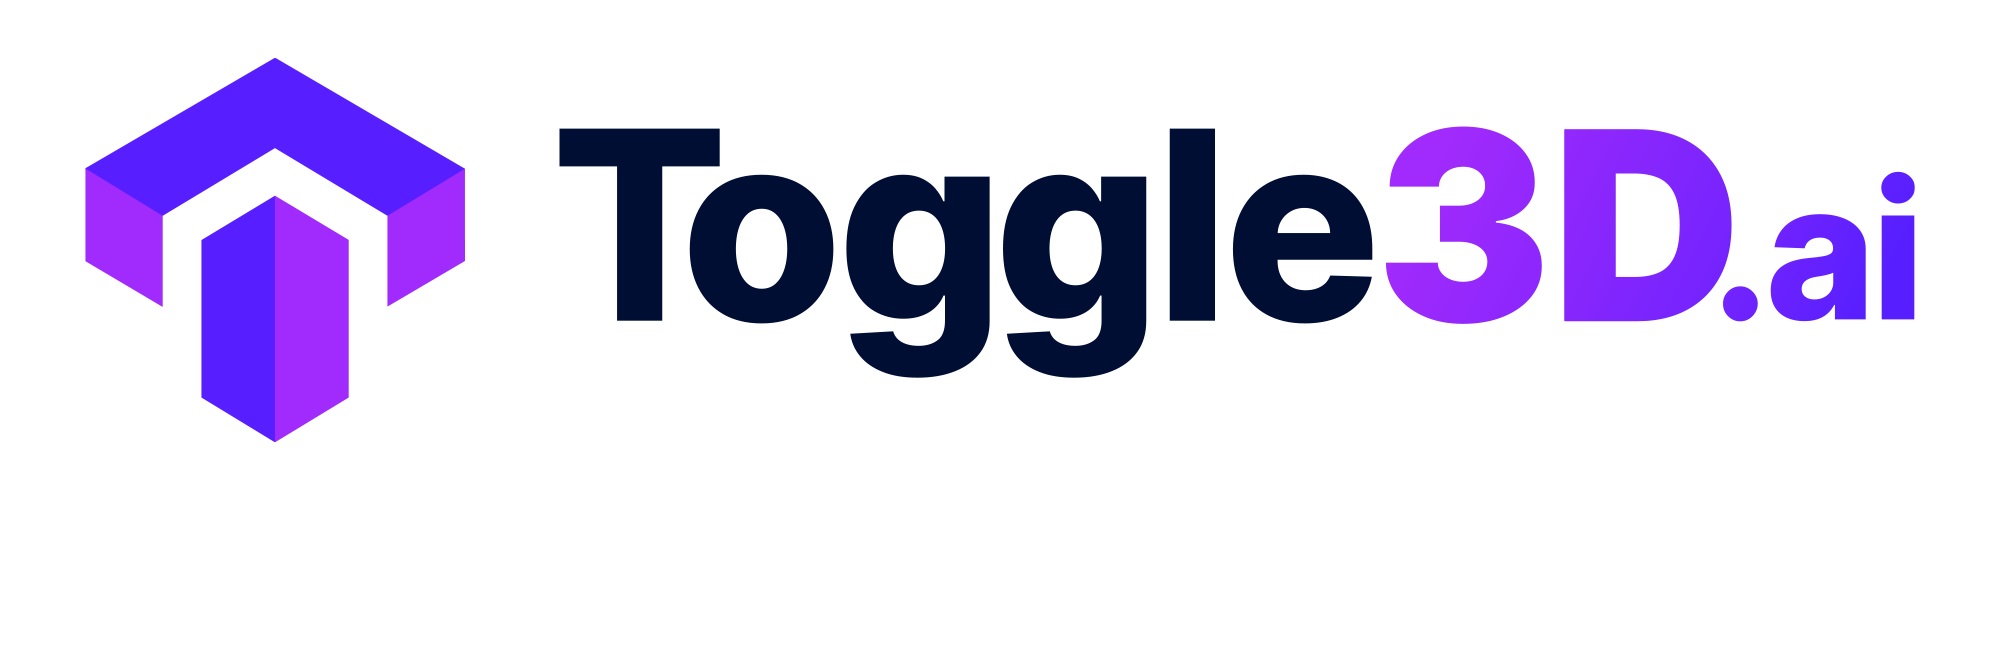 Toggle3D.ai Announces its Breakthrough AI Increases 3D Model Production For Ecommerce Enterprise Customers … – GlobeNewswire